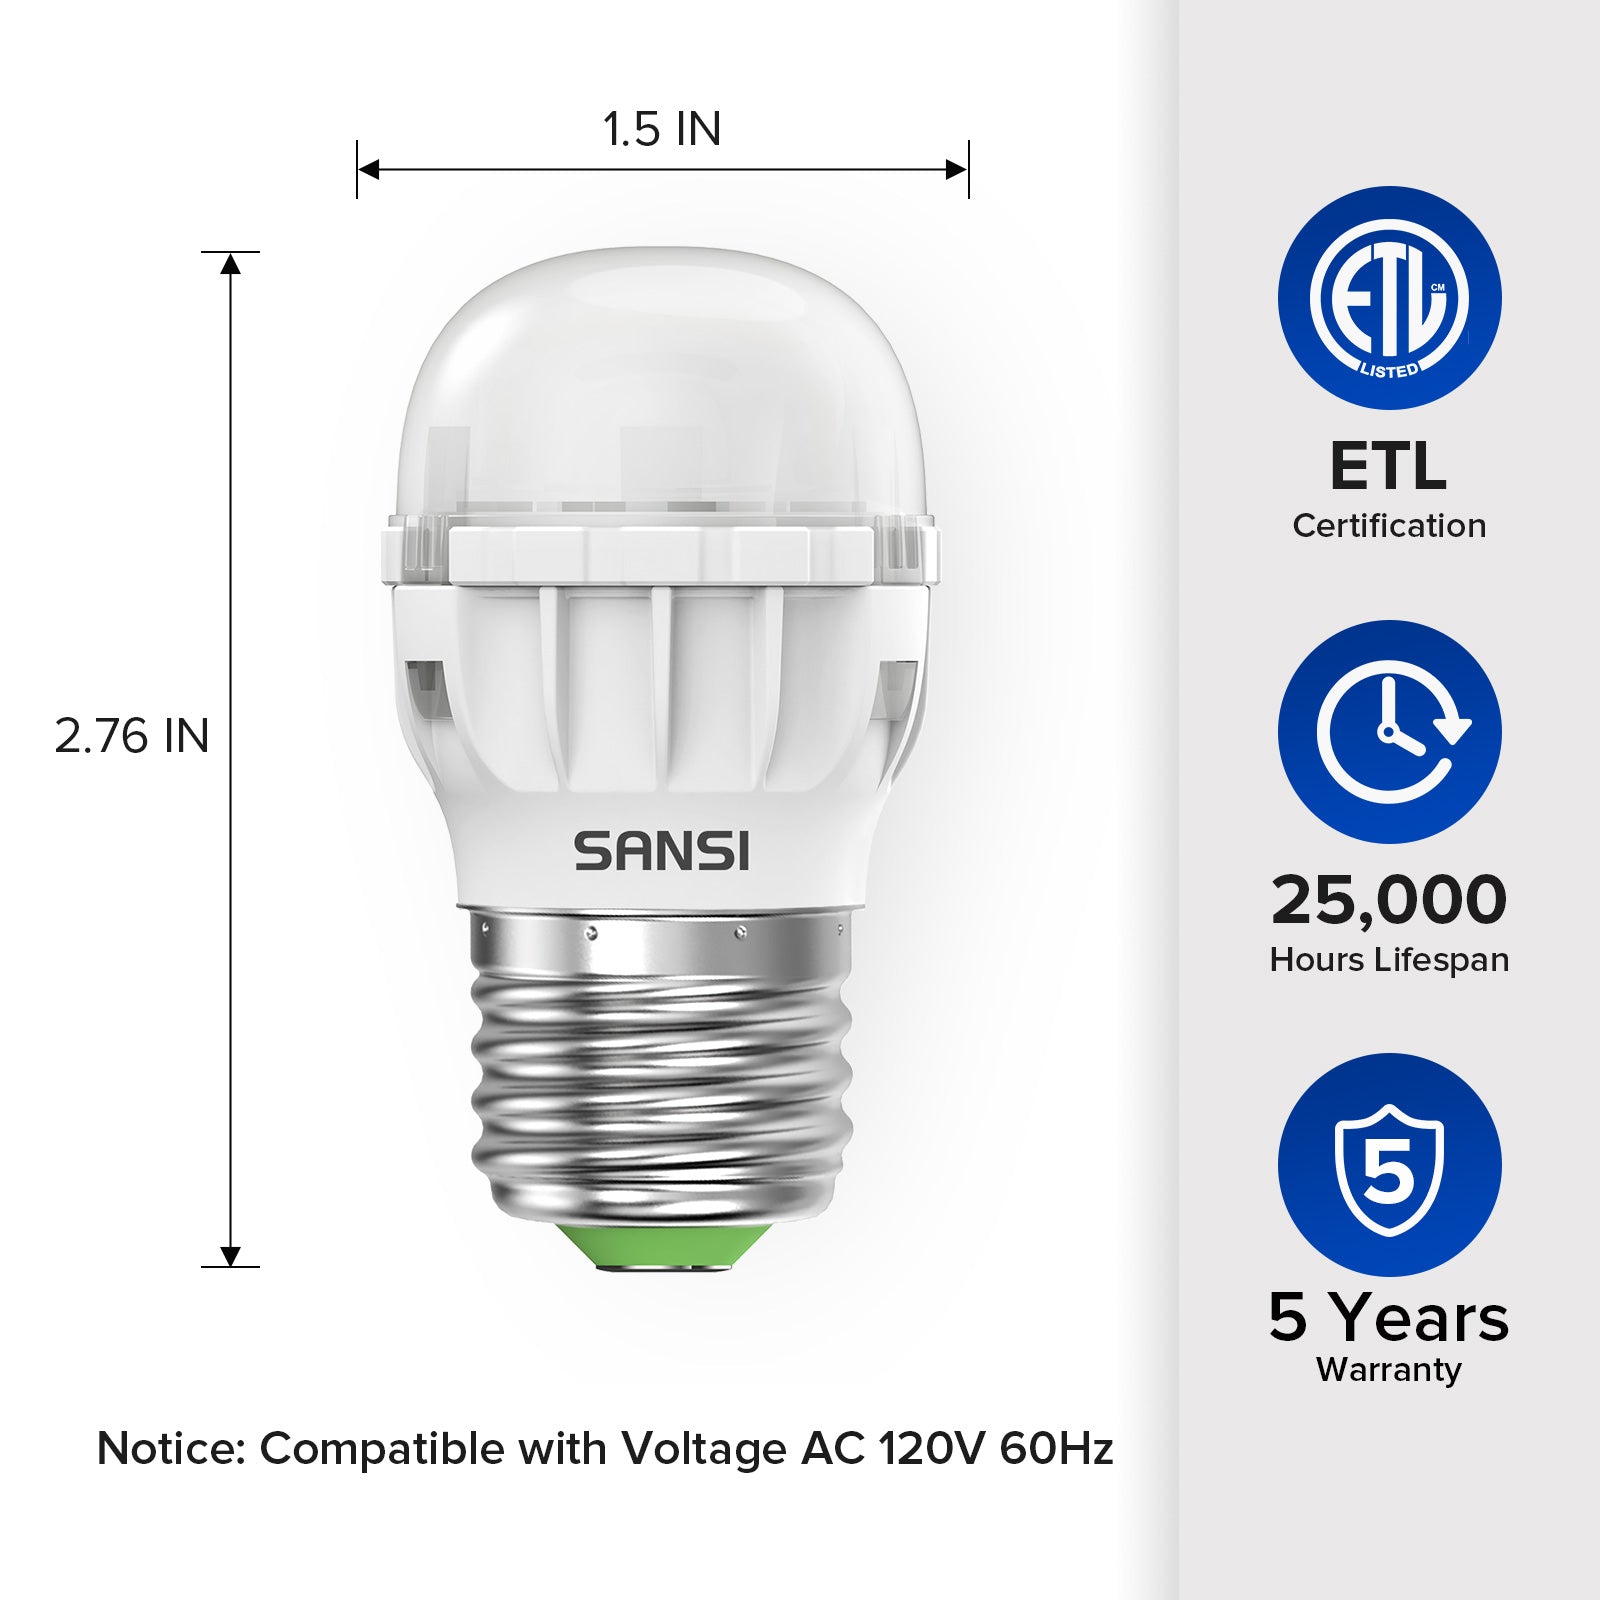 A11 4W LED Light Bulb has ROHS certification, 25,000 hours lifespan, 5-year warranty